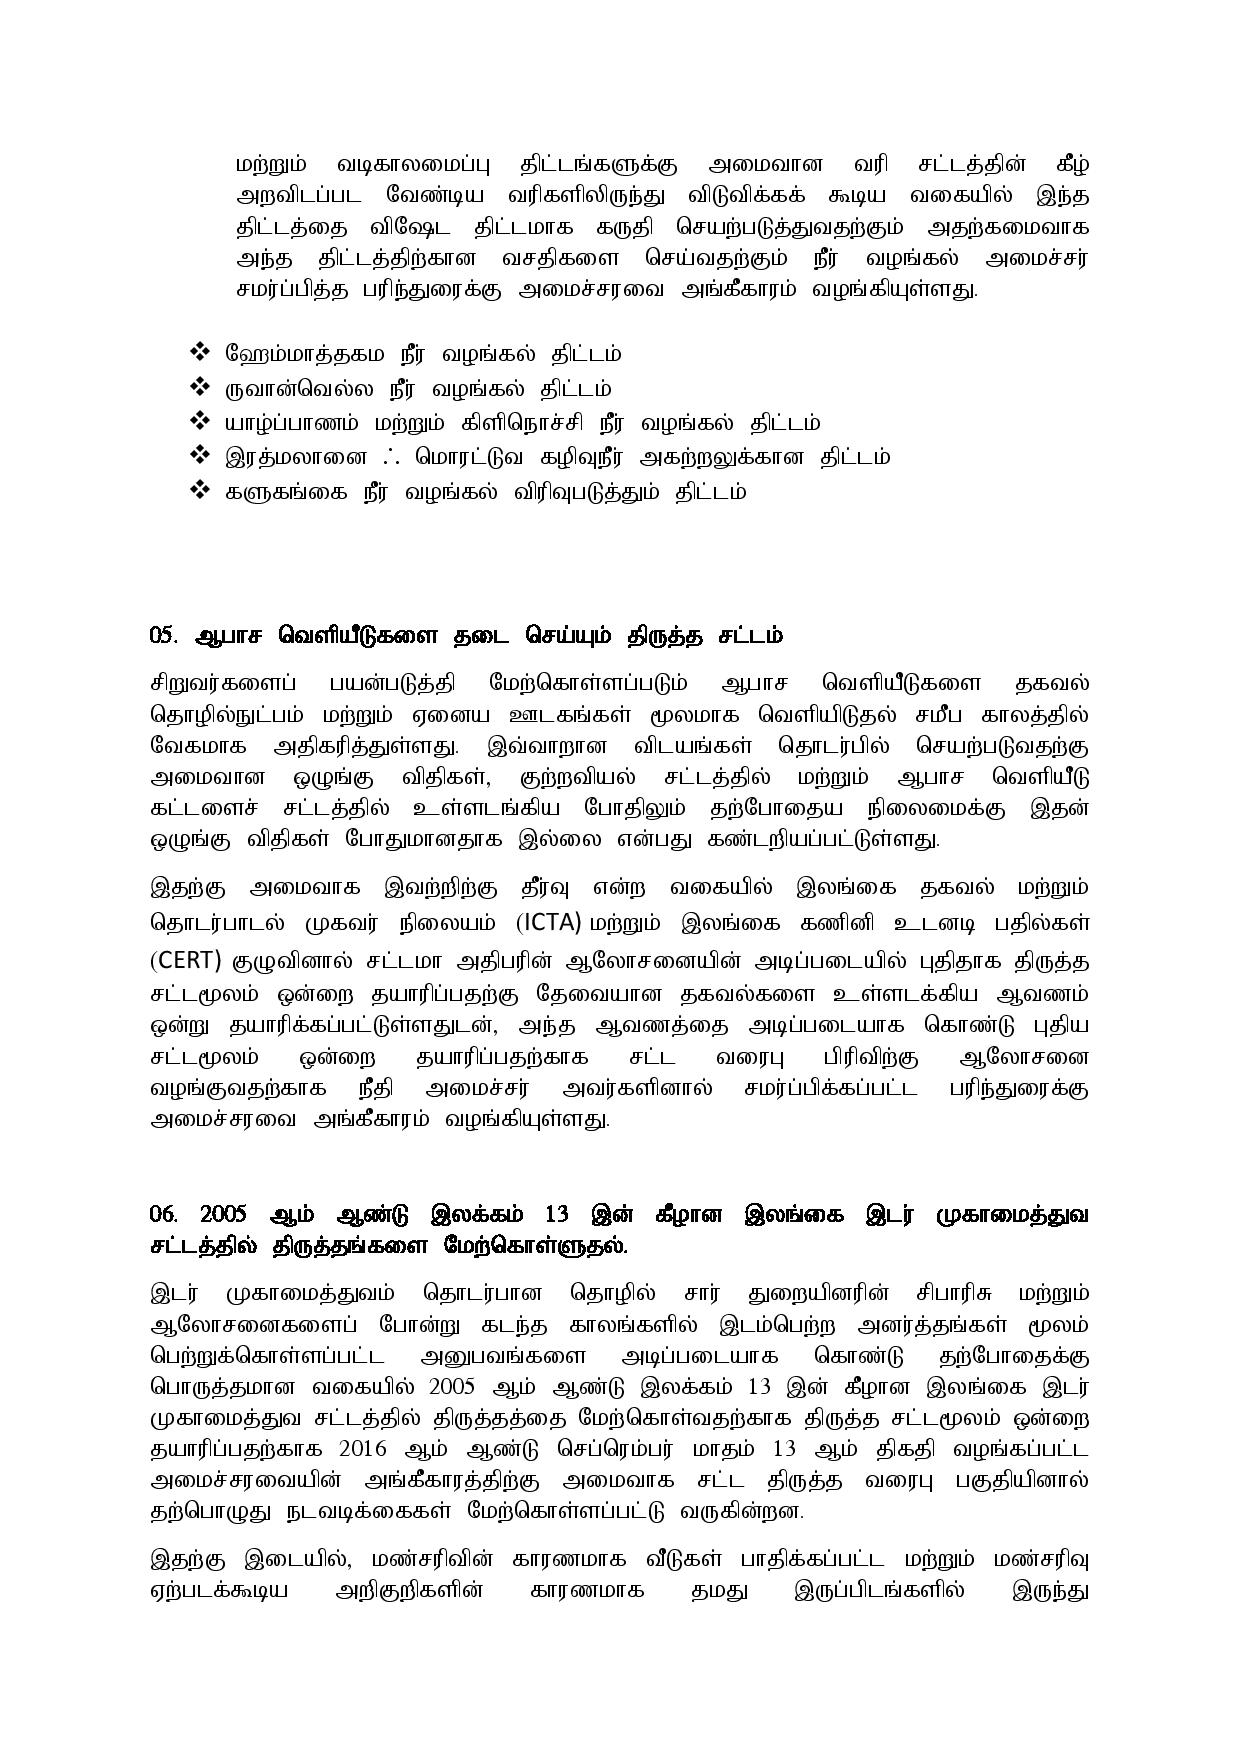 21.09.2020 Cabinet tamil 1 page 004